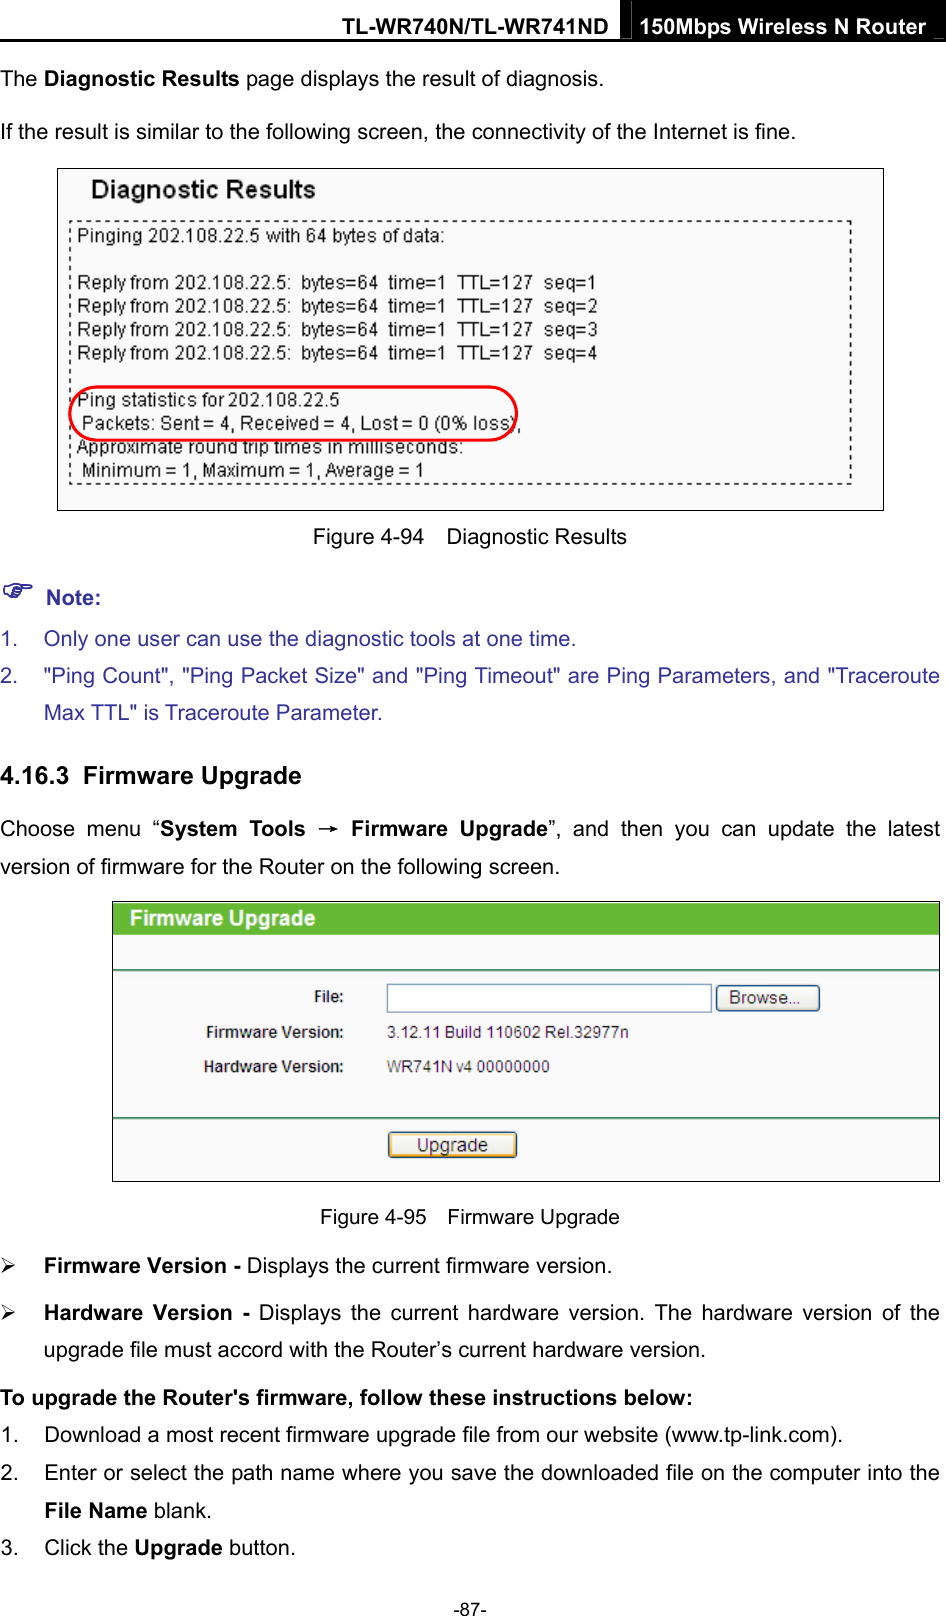 TL-WR740N/TL-WR741ND 150Mbps Wireless N Router  -87- The Diagnostic Results page displays the result of diagnosis. If the result is similar to the following screen, the connectivity of the Internet is fine.  Figure 4-94  Diagnostic Results ) Note: 1.  Only one user can use the diagnostic tools at one time.   2.  &quot;Ping Count&quot;, &quot;Ping Packet Size&quot; and &quot;Ping Timeout&quot; are Ping Parameters, and &quot;Traceroute Max TTL&quot; is Traceroute Parameter.   4.16.3  Firmware Upgrade Choose menu “System Tools → Firmware Upgrade”, and then you can update the latest version of firmware for the Router on the following screen.  Figure 4-95  Firmware Upgrade ¾ Firmware Version - Displays the current firmware version. ¾ Hardware Version - Displays the current hardware version. The hardware version of the upgrade file must accord with the Router’s current hardware version. To upgrade the Router&apos;s firmware, follow these instructions below: 1.  Download a most recent firmware upgrade file from our website (www.tp-link.com).   2.  Enter or select the path name where you save the downloaded file on the computer into the File Name blank.   3. Click the Upgrade button.   